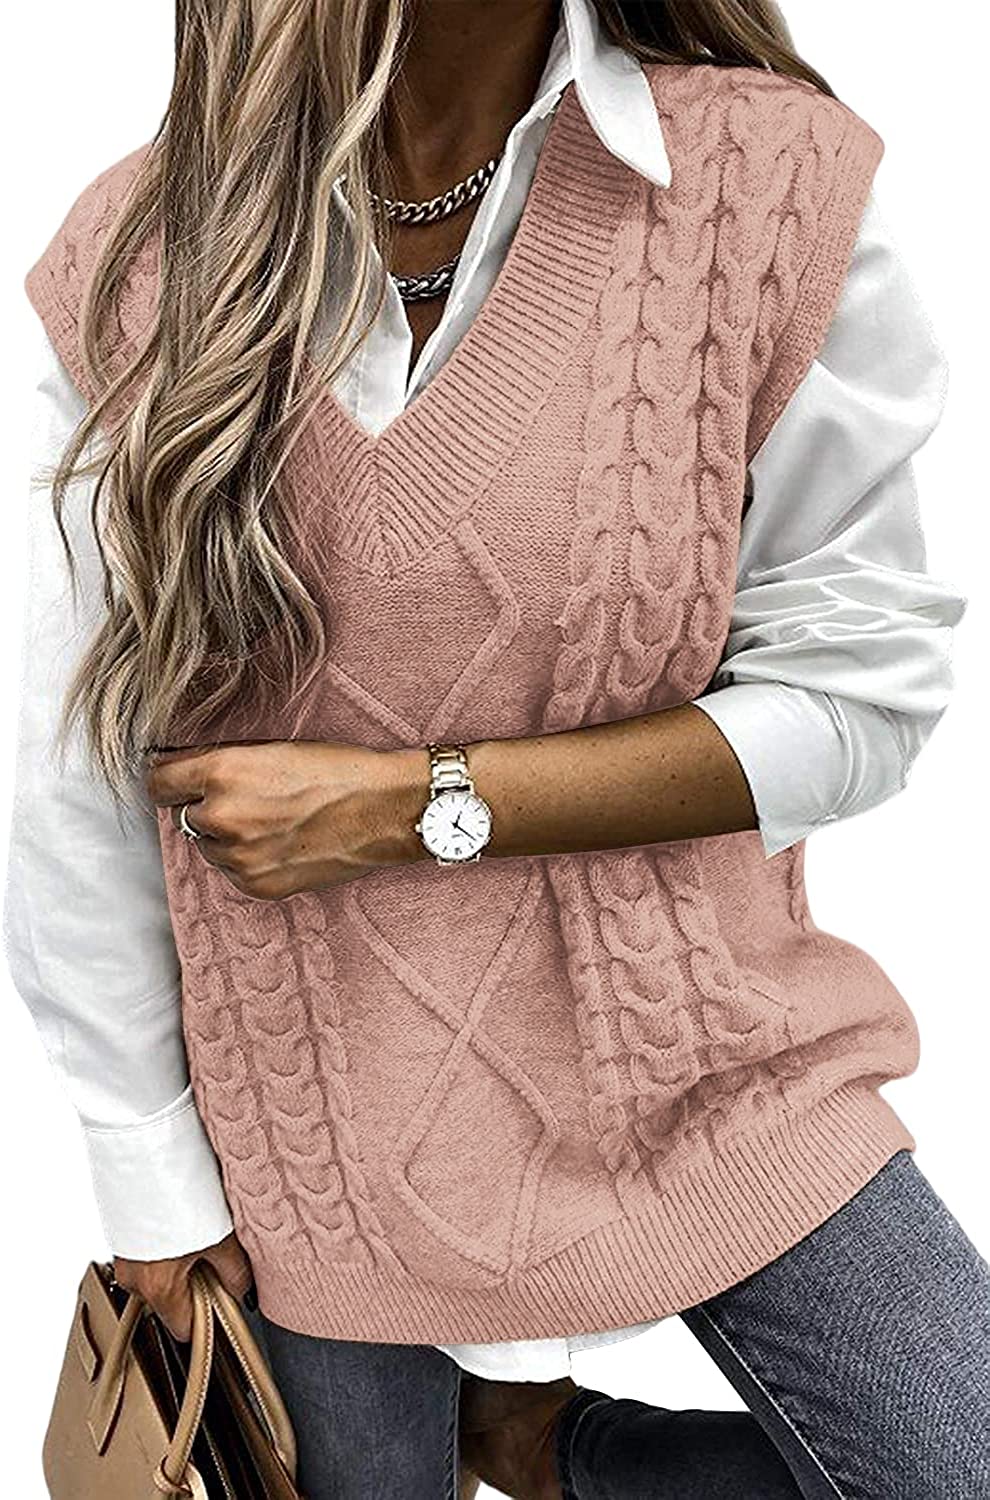 Yousify Women Cable Knit Oversize Sweater Vest V Neck Sleeveless Vintage Loose Sweaters Tops 